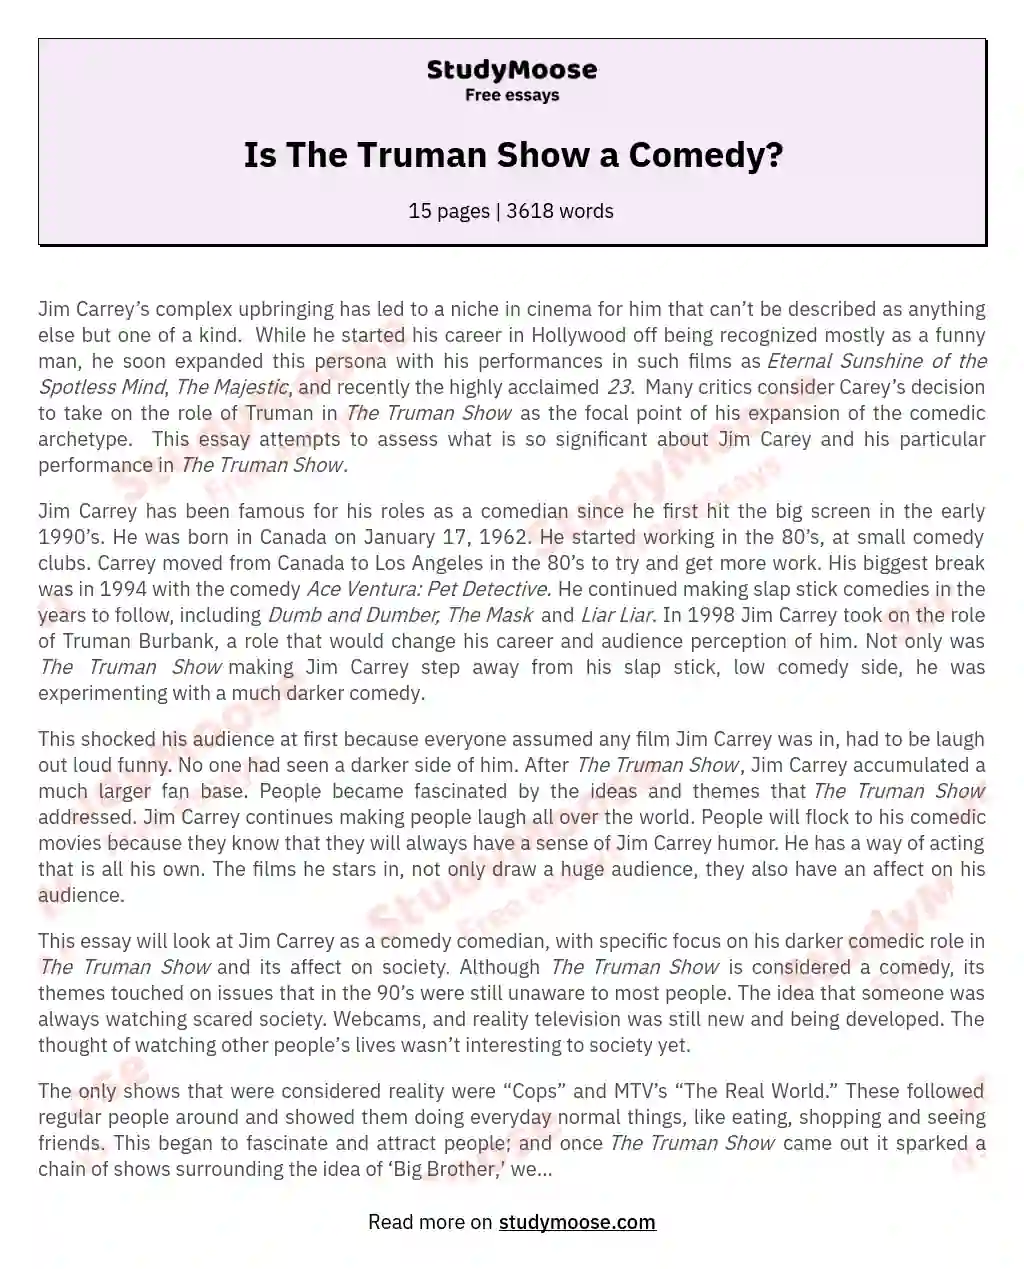 Is The Truman Show a Comedy? essay